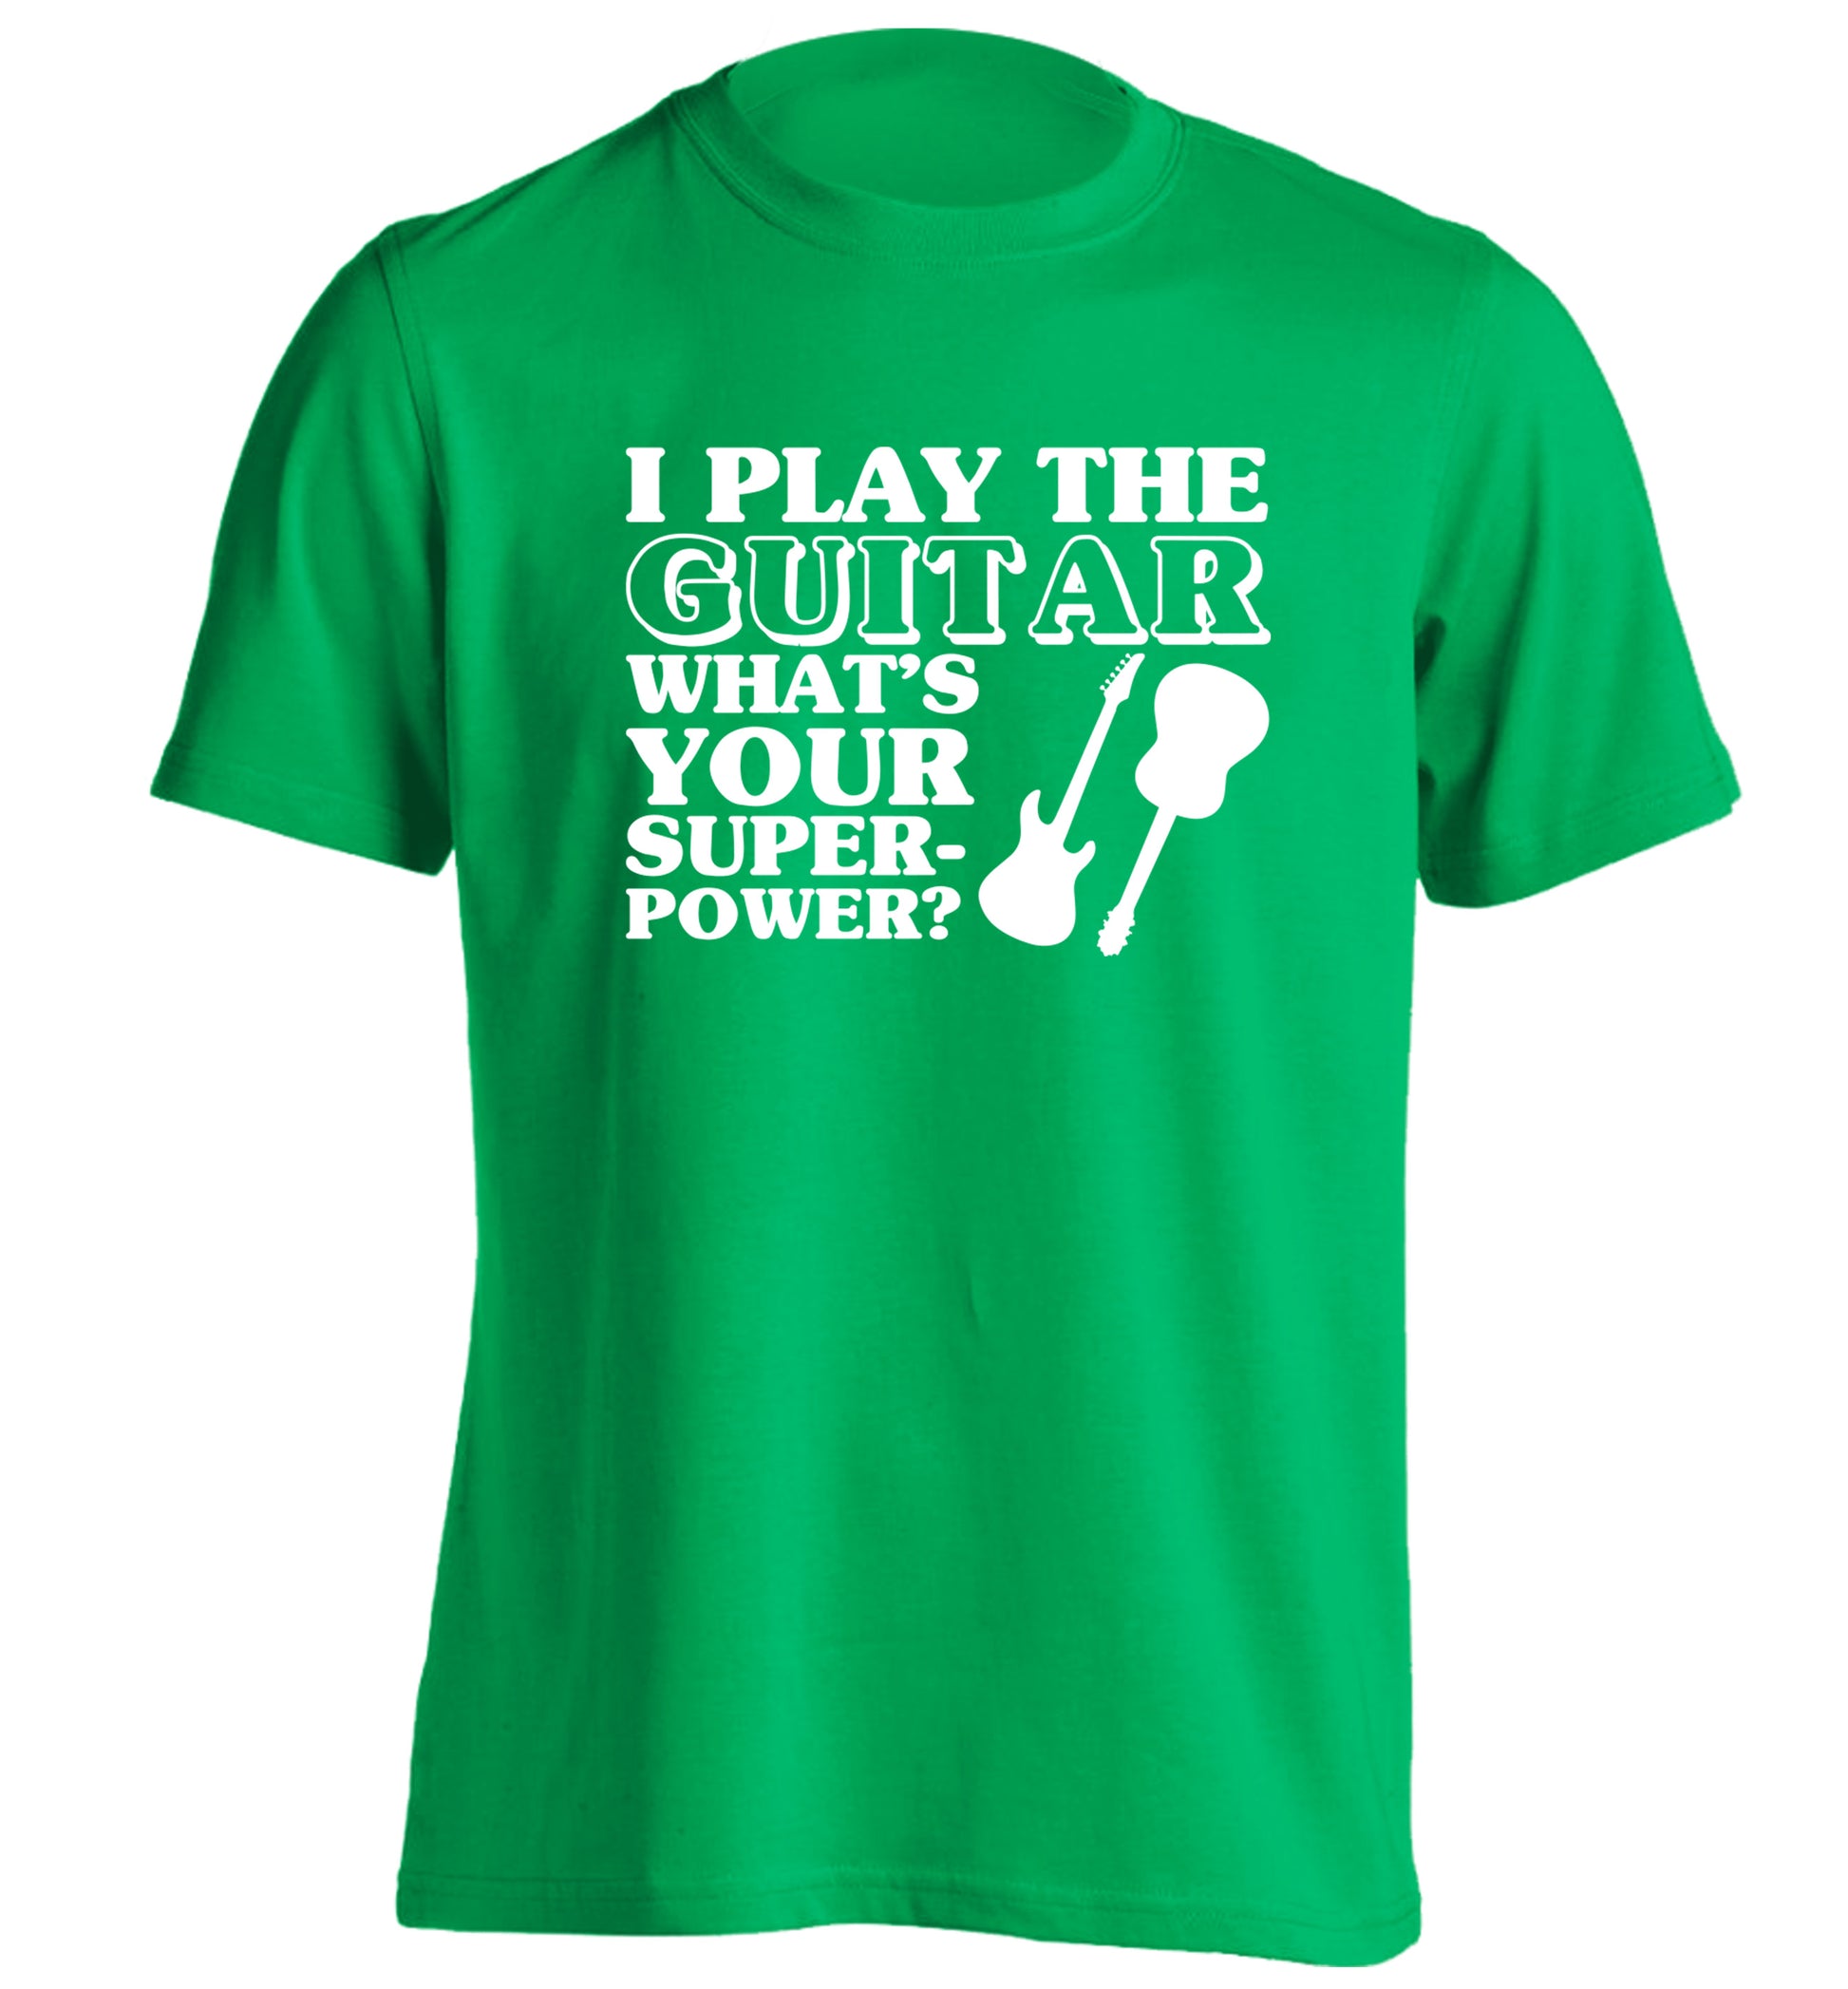 I play the guitar what's your superpower? adults unisex green Tshirt small